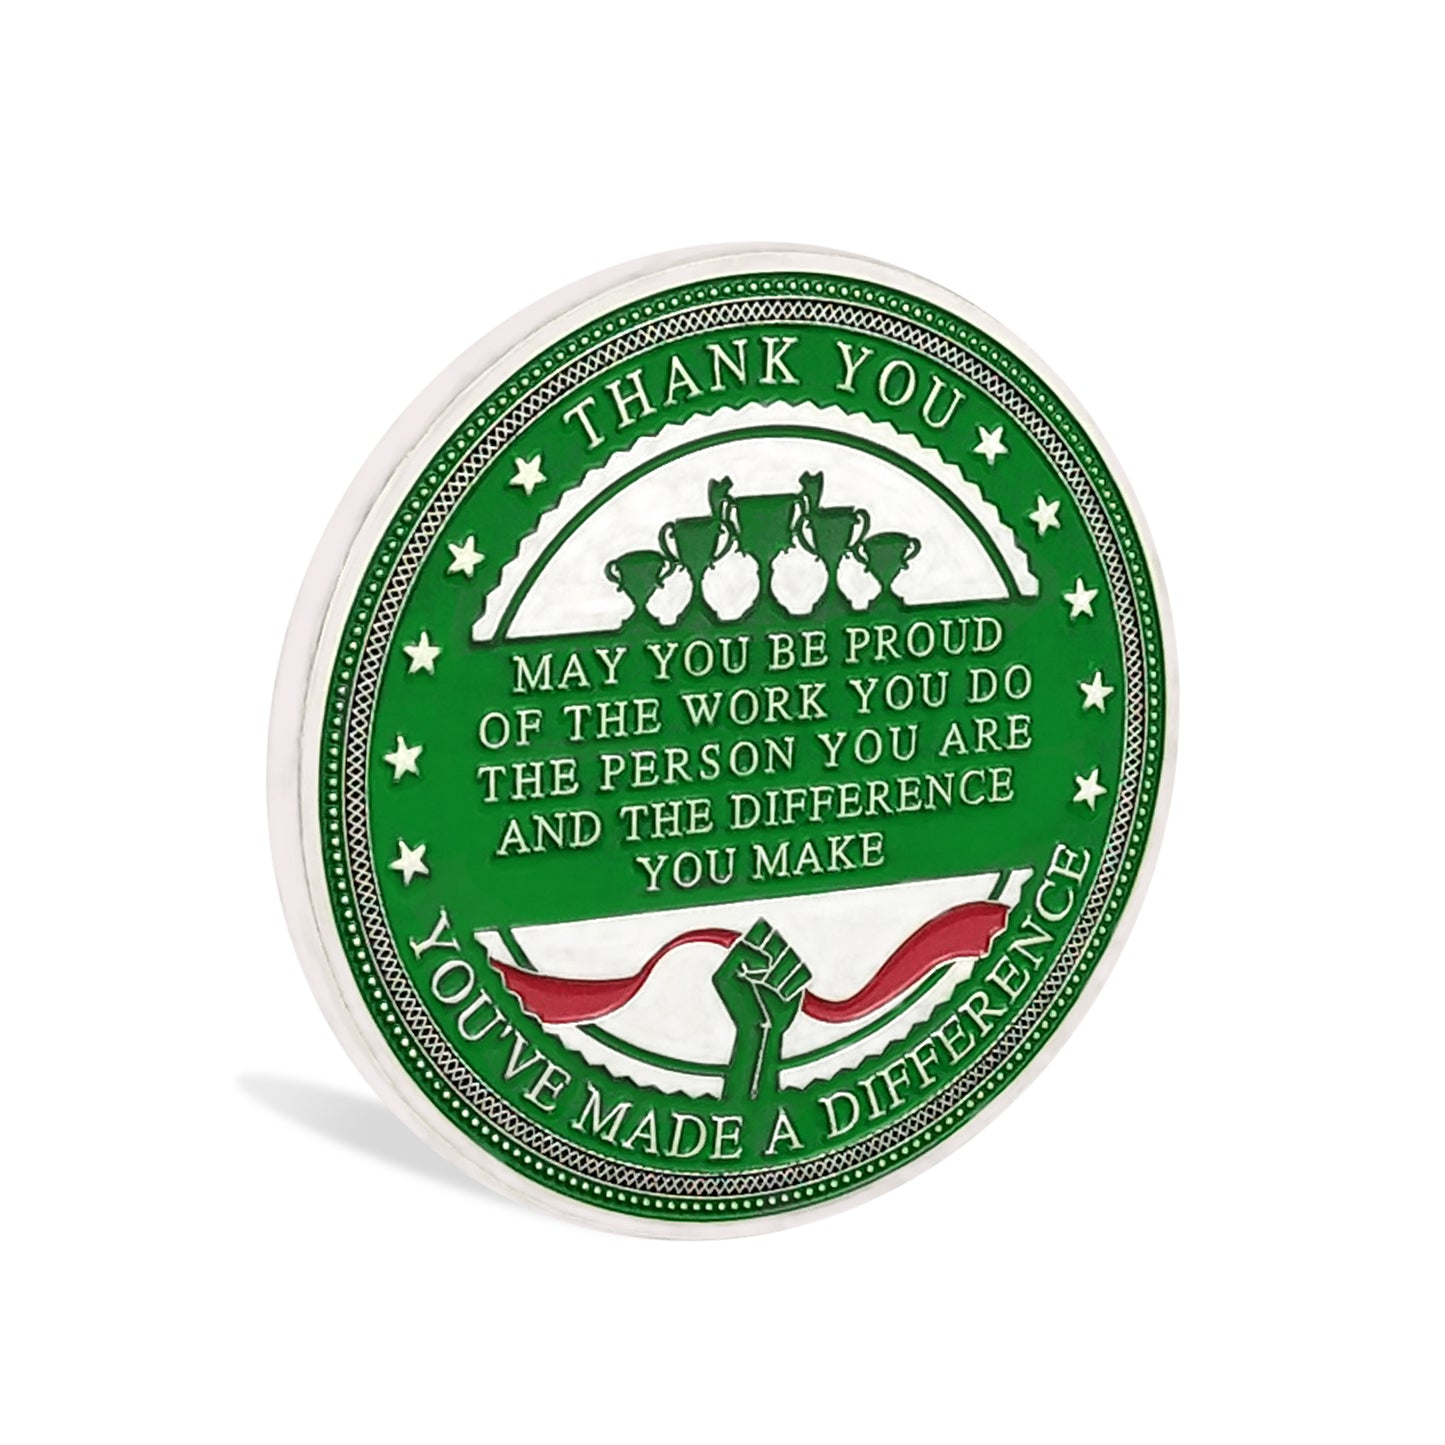 Encouragement Challenge Coin-Employee Appreciation Gifts Inspirational Thank You Coin for Students and Cowokers-Building Mastery and Skill